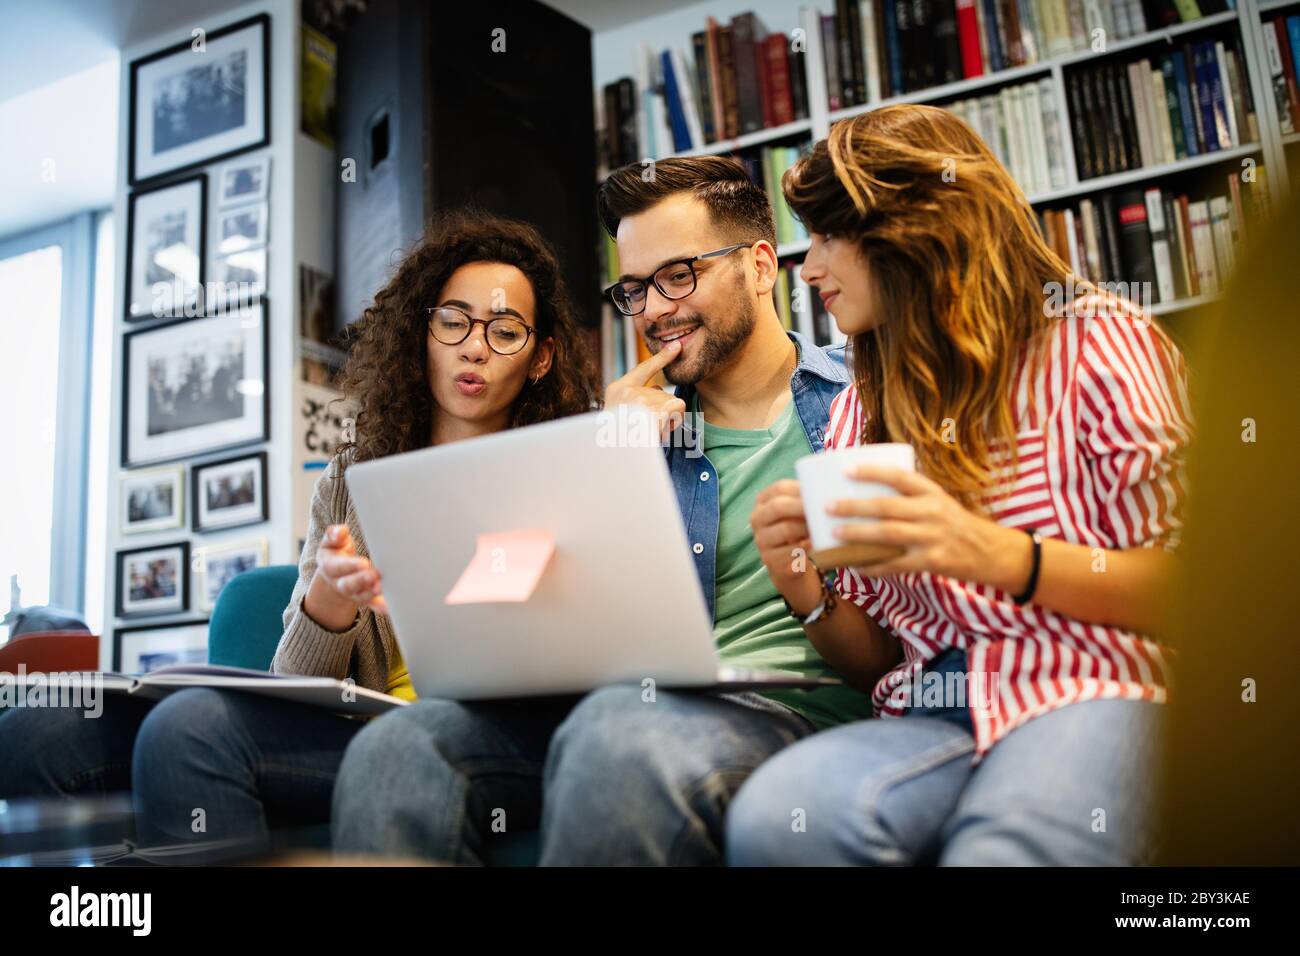 Group of college students studying in the school library. Stock Photo